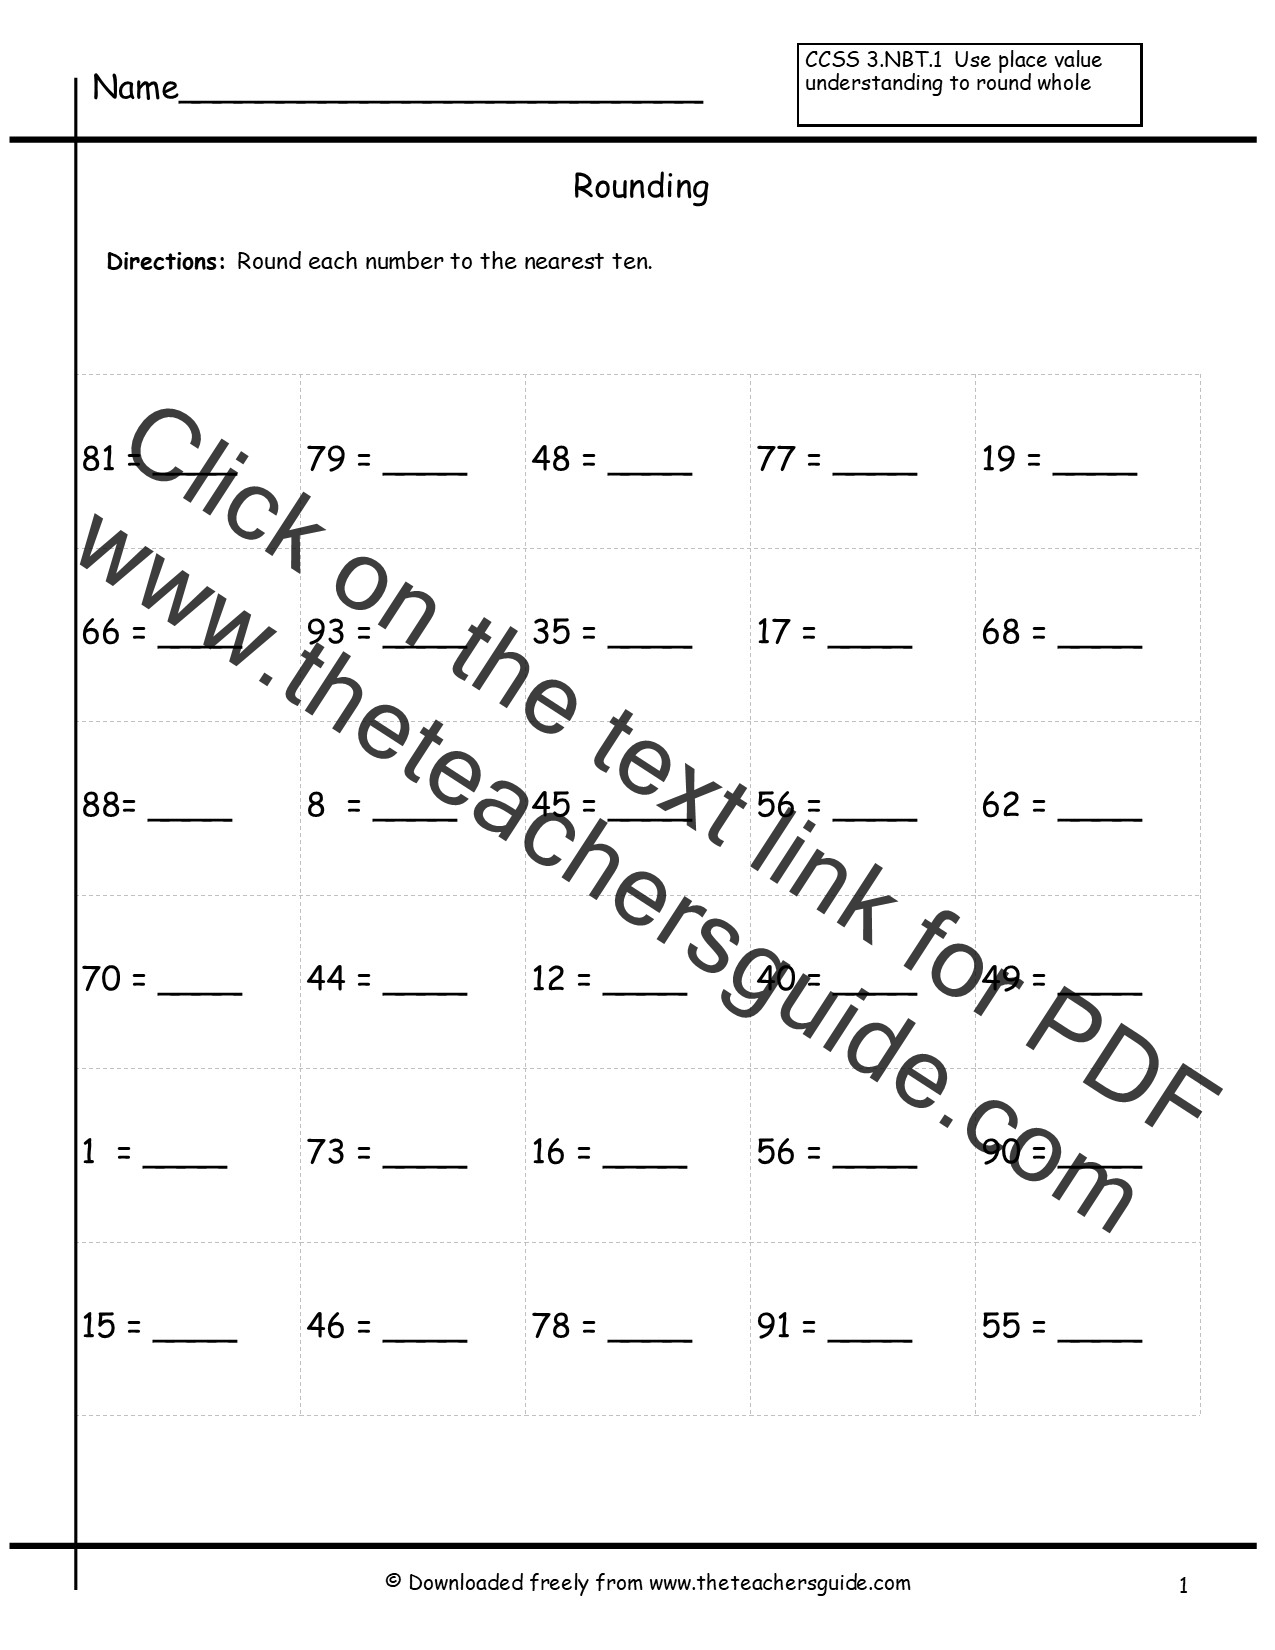 rounding-whole-numbers-worksheets-from-the-teacher-s-guide